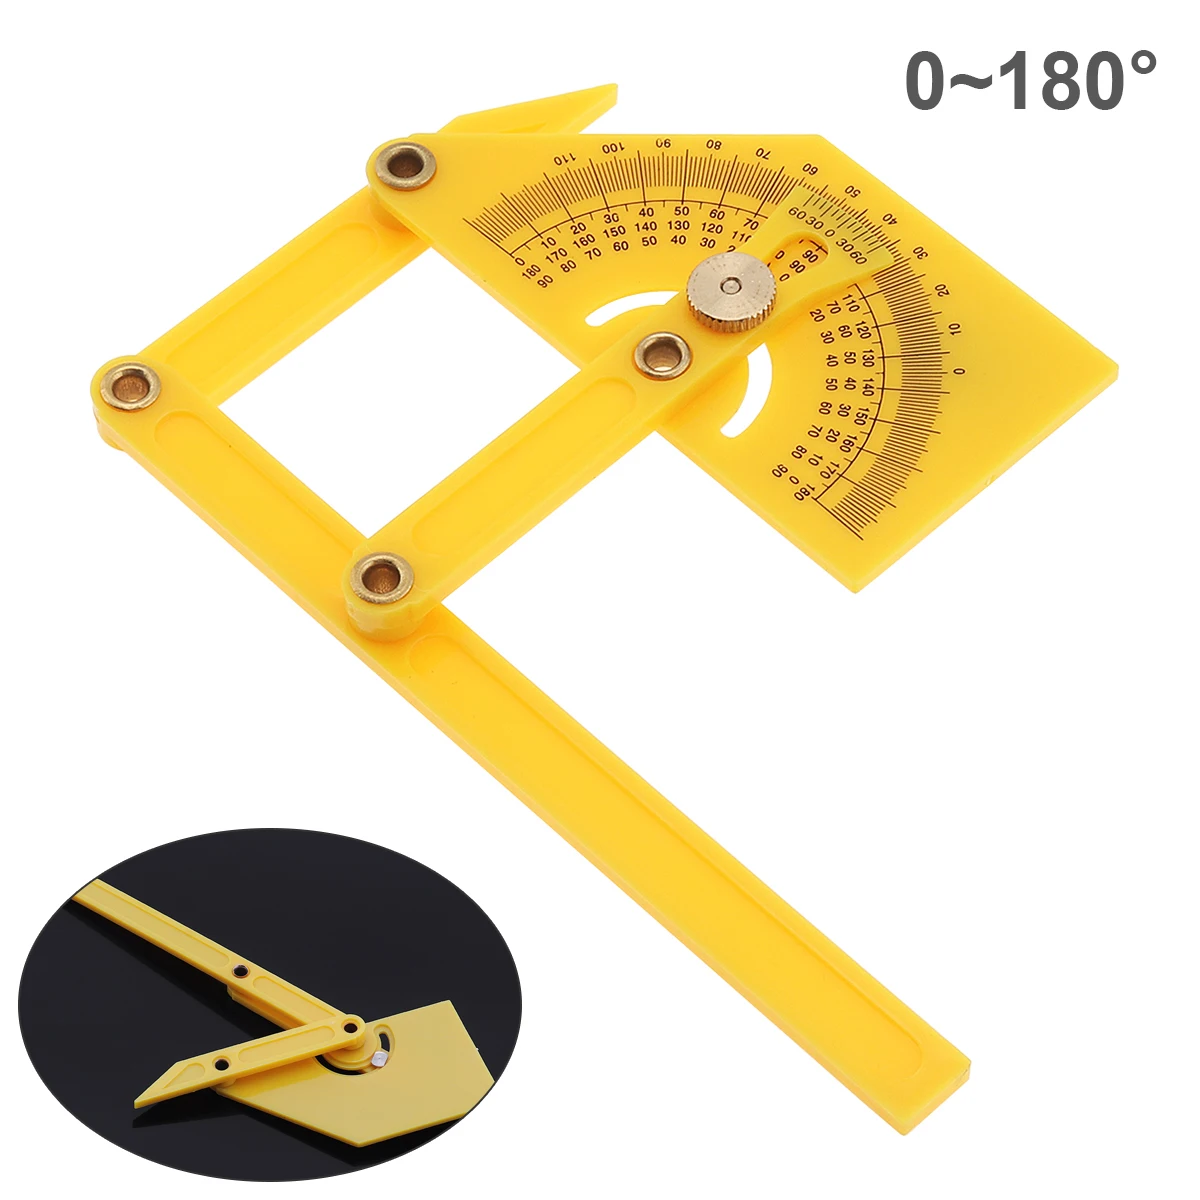 

0-180 Degree Adjustable Plastic Protractor 4 in 1 T-bevel Angle Sloped Angles Finder Mark Measure Tool Arm Ruler Gauge Tools